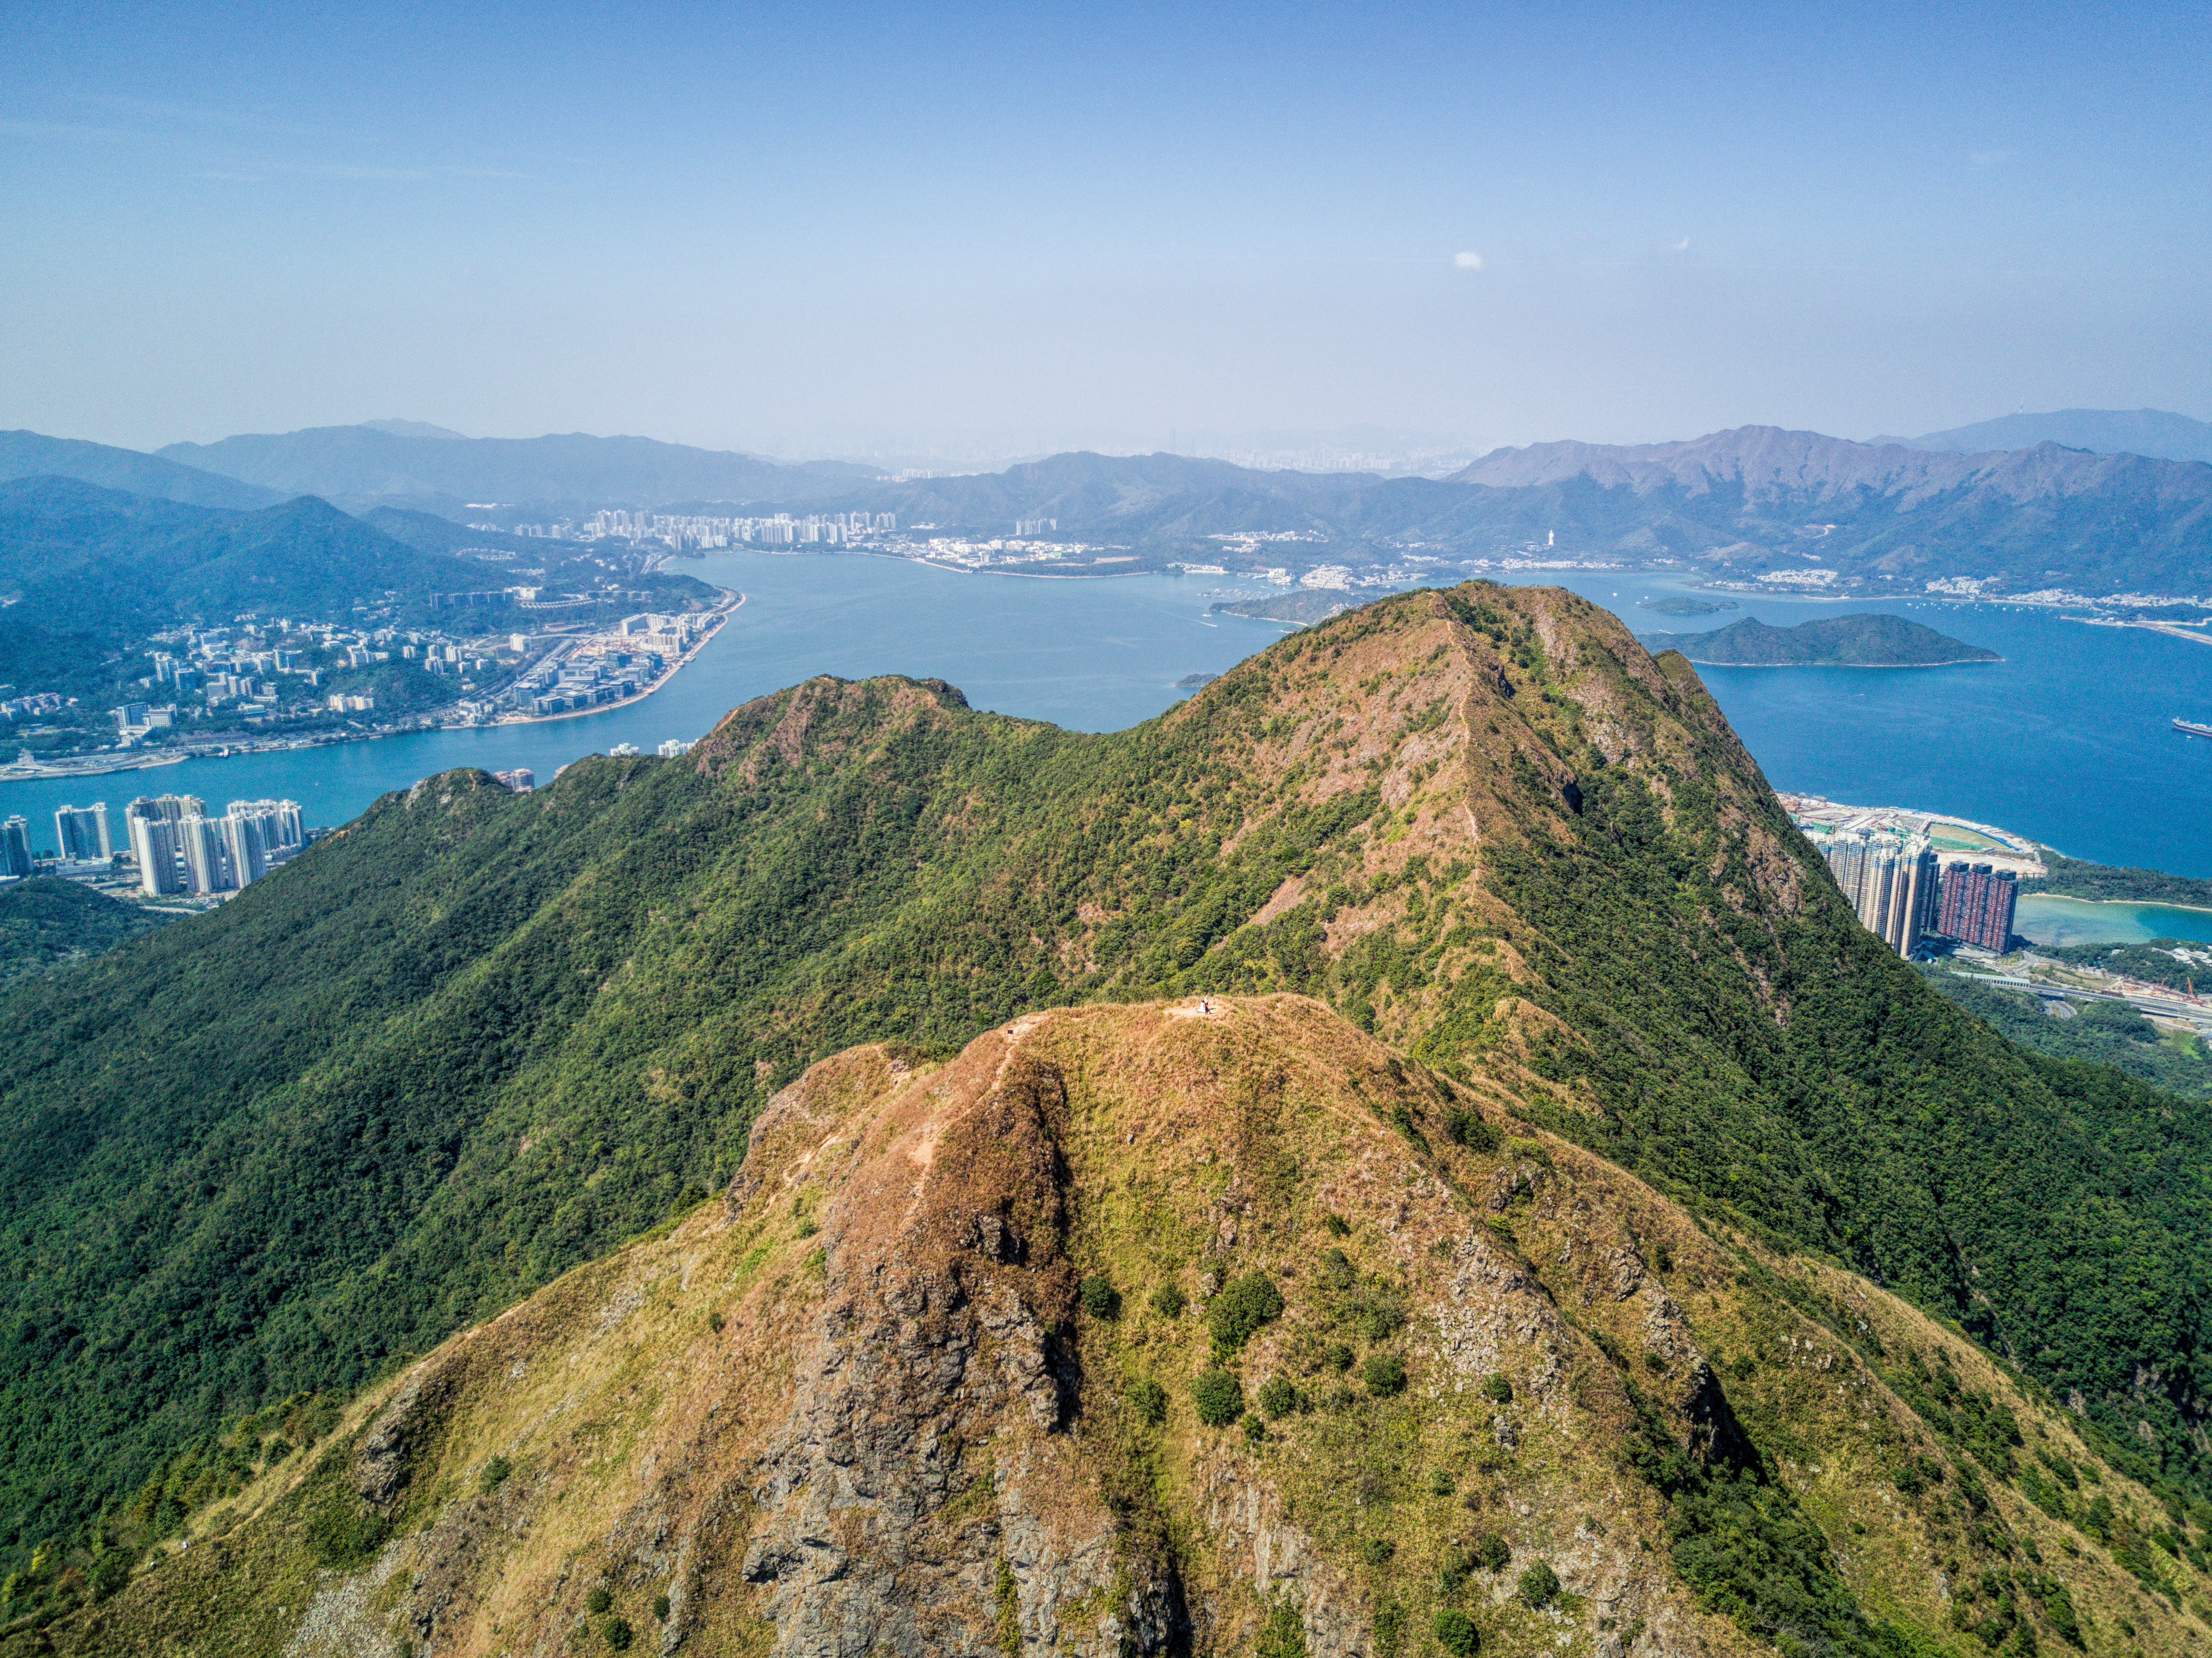 It’s a steep haul to the top of one of Hong Kong’s most distinctive peaks, but the views on the way up, and from the top, are worth it, and you’ll feel a world away from the skyscrapers  below